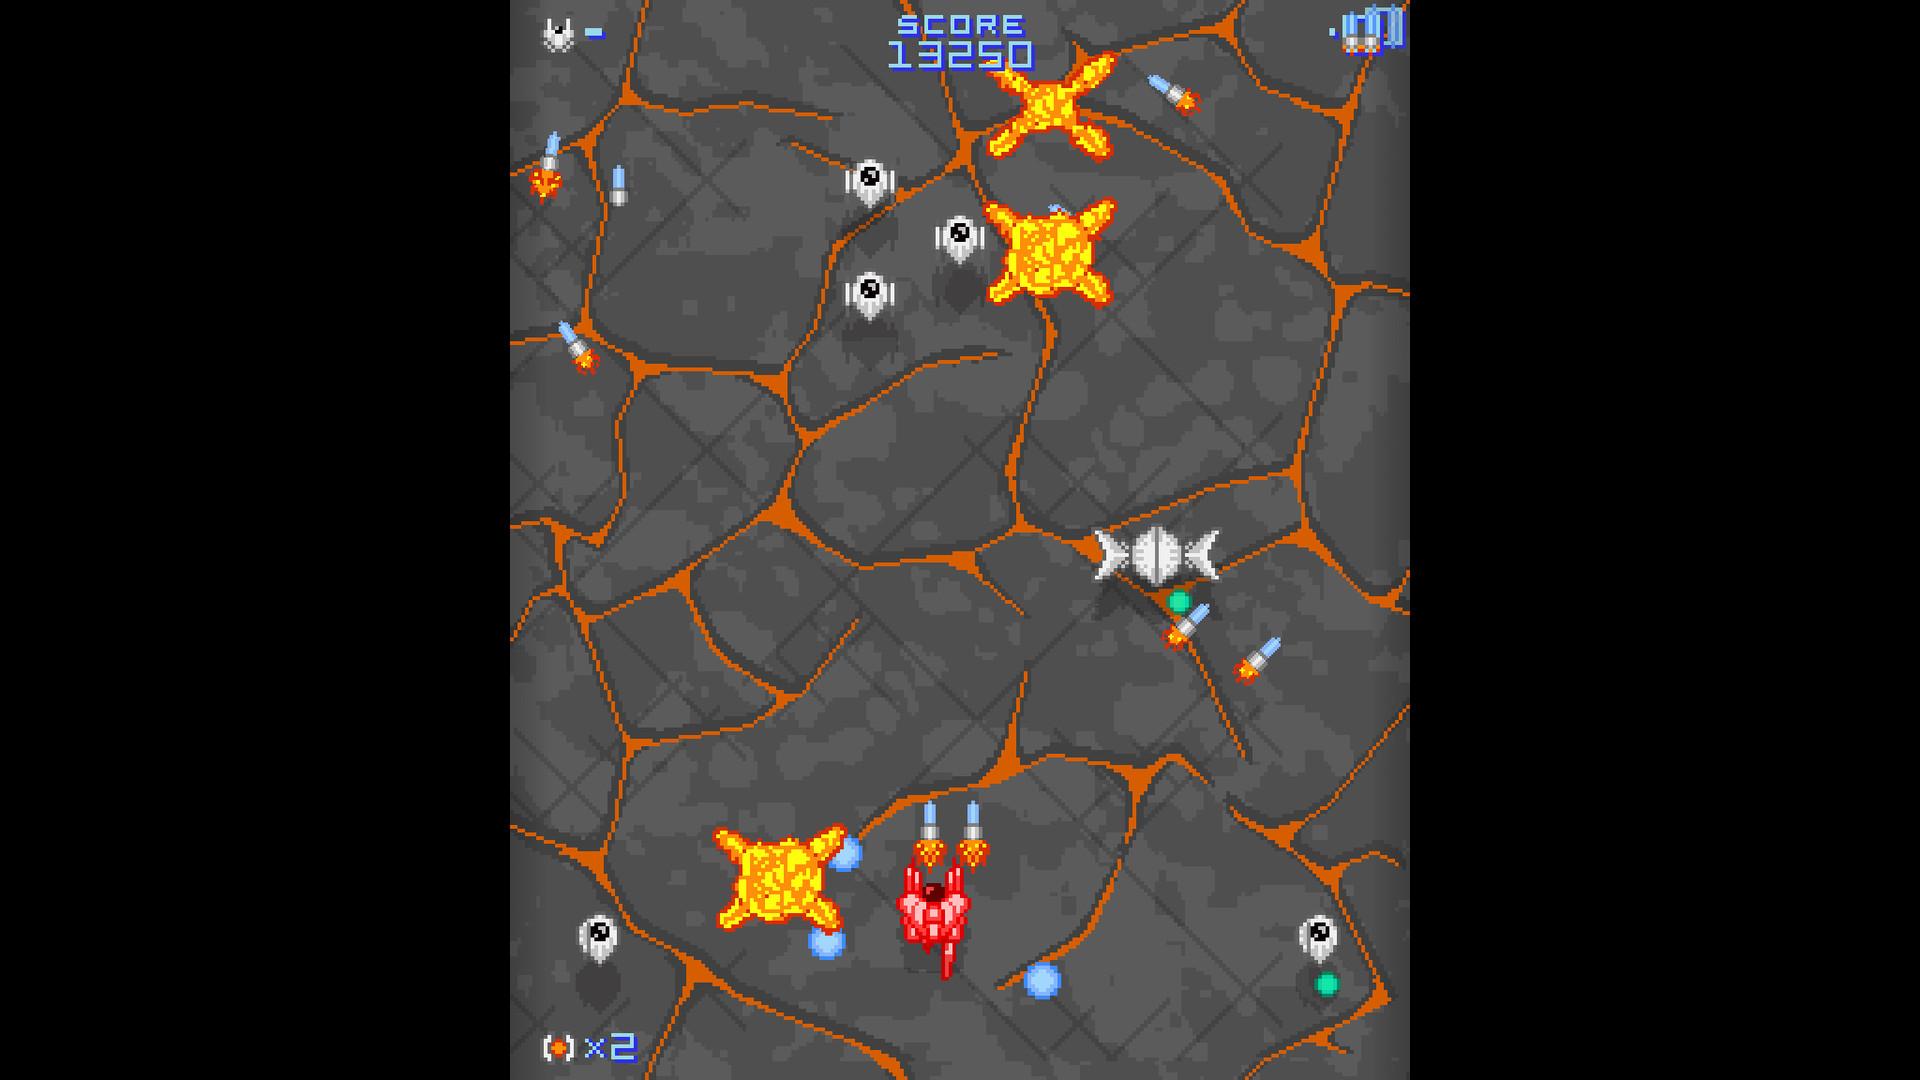 Screenshot №2 from game Mobile Astro